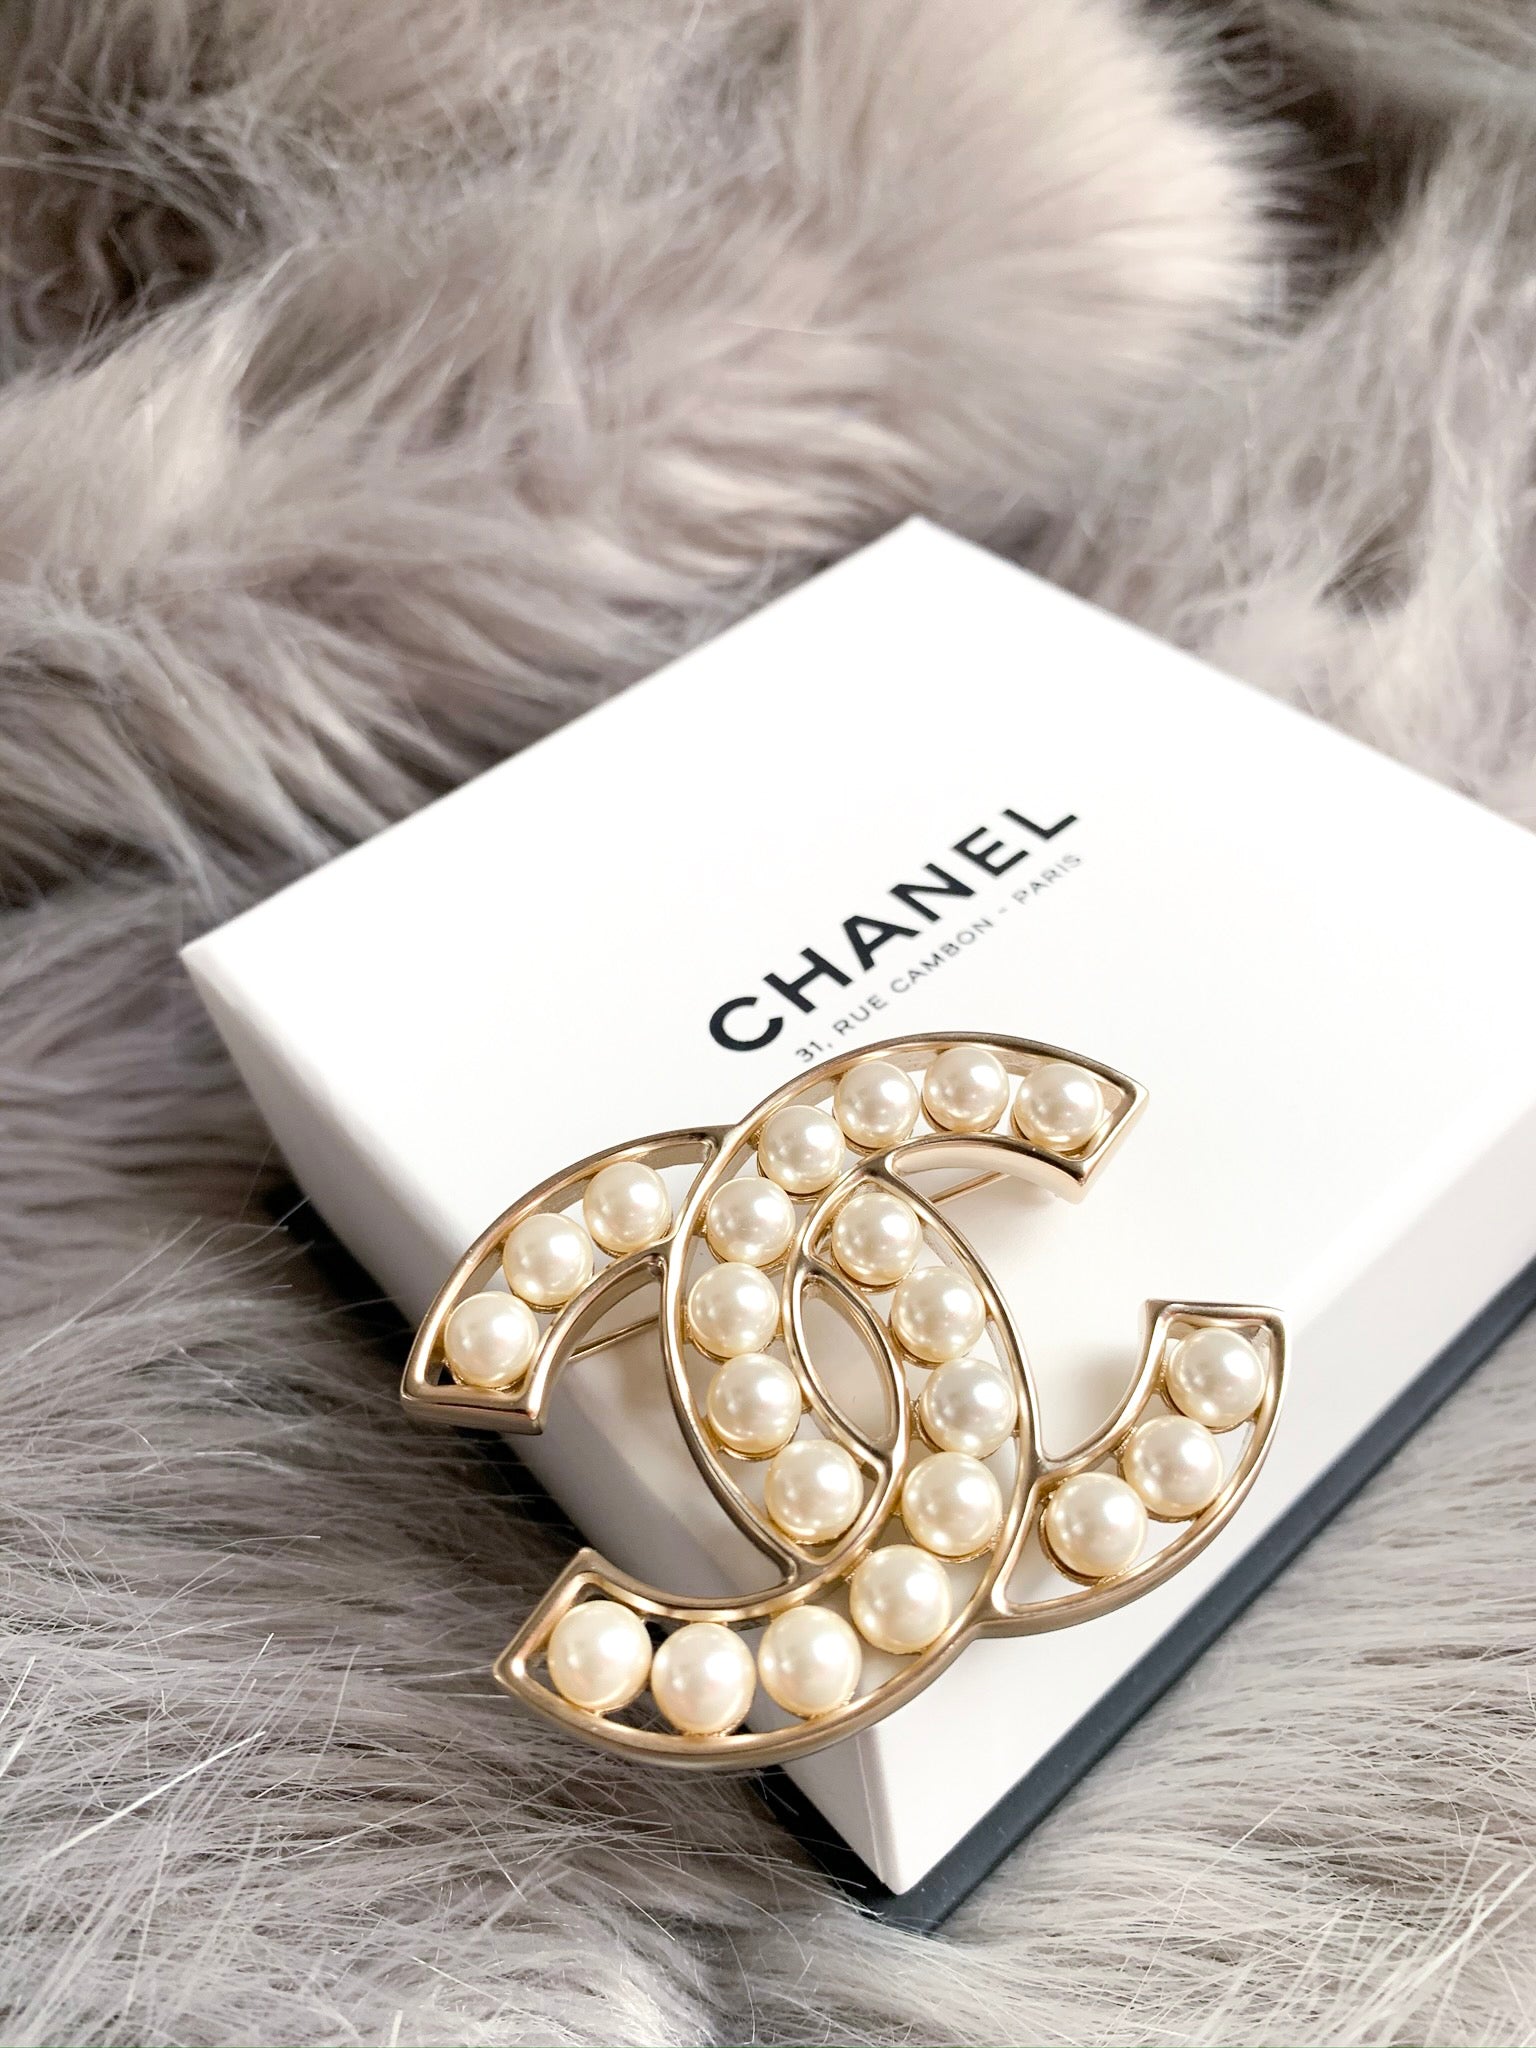 Chanel VIP Gift CC LOGO Pearl Pin/Brooch from Chanel beauty